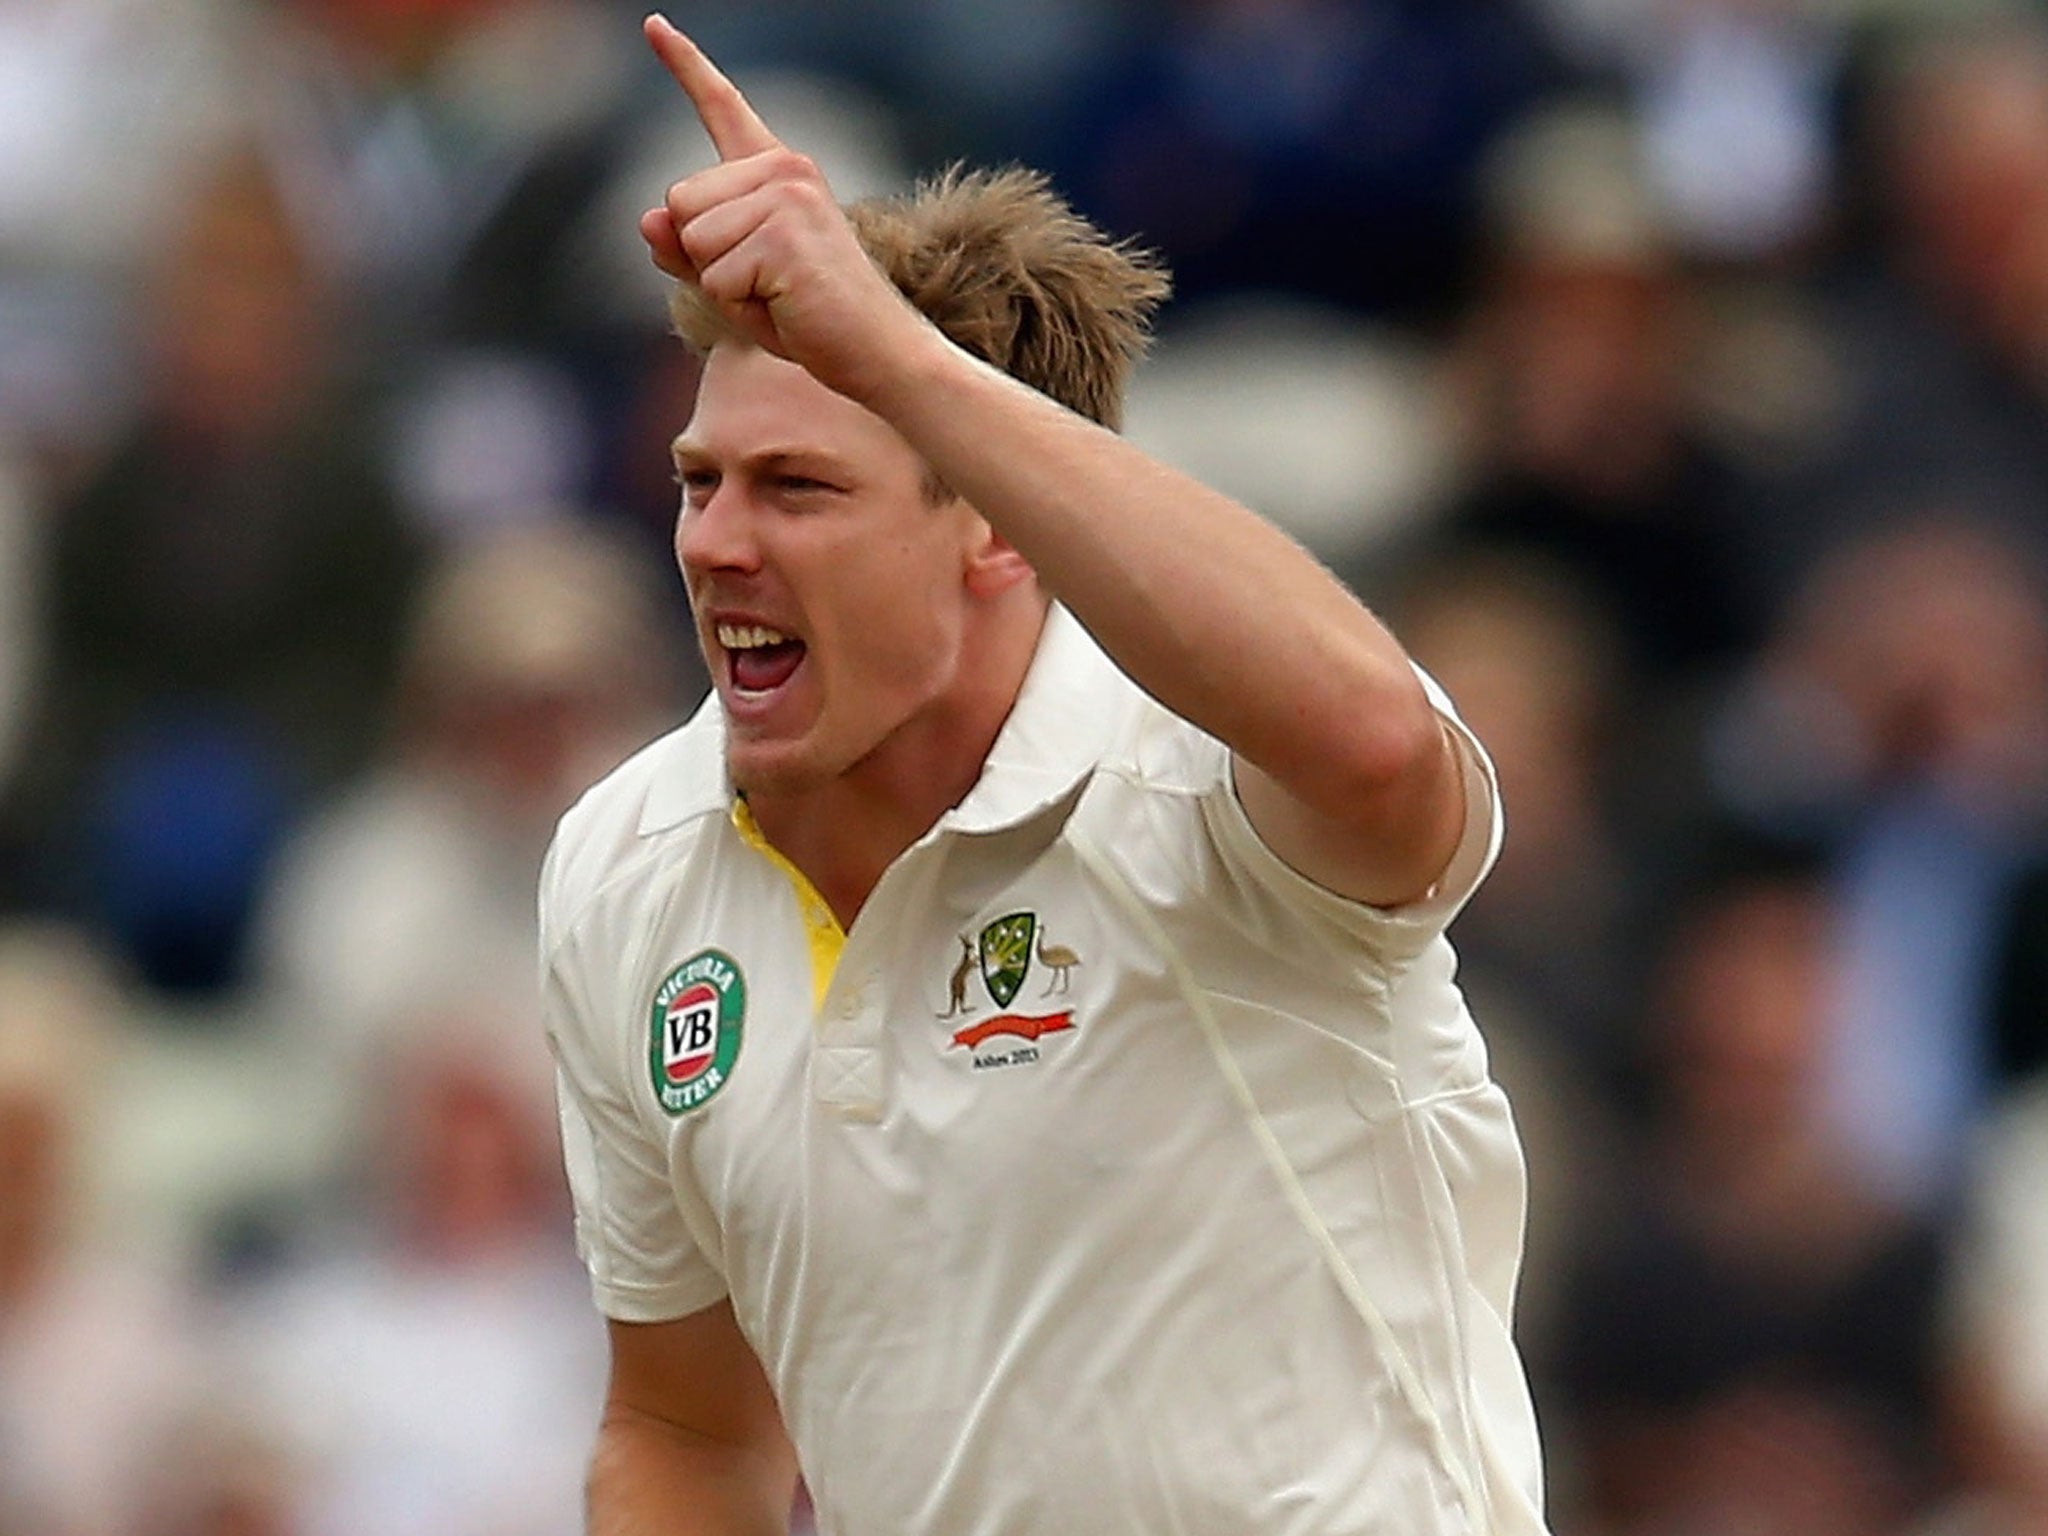 James Faulkner: Left-arm quick bowler and typically hard-nosed Australian, his runs against England in the Champions Trophy showed batting credentials.